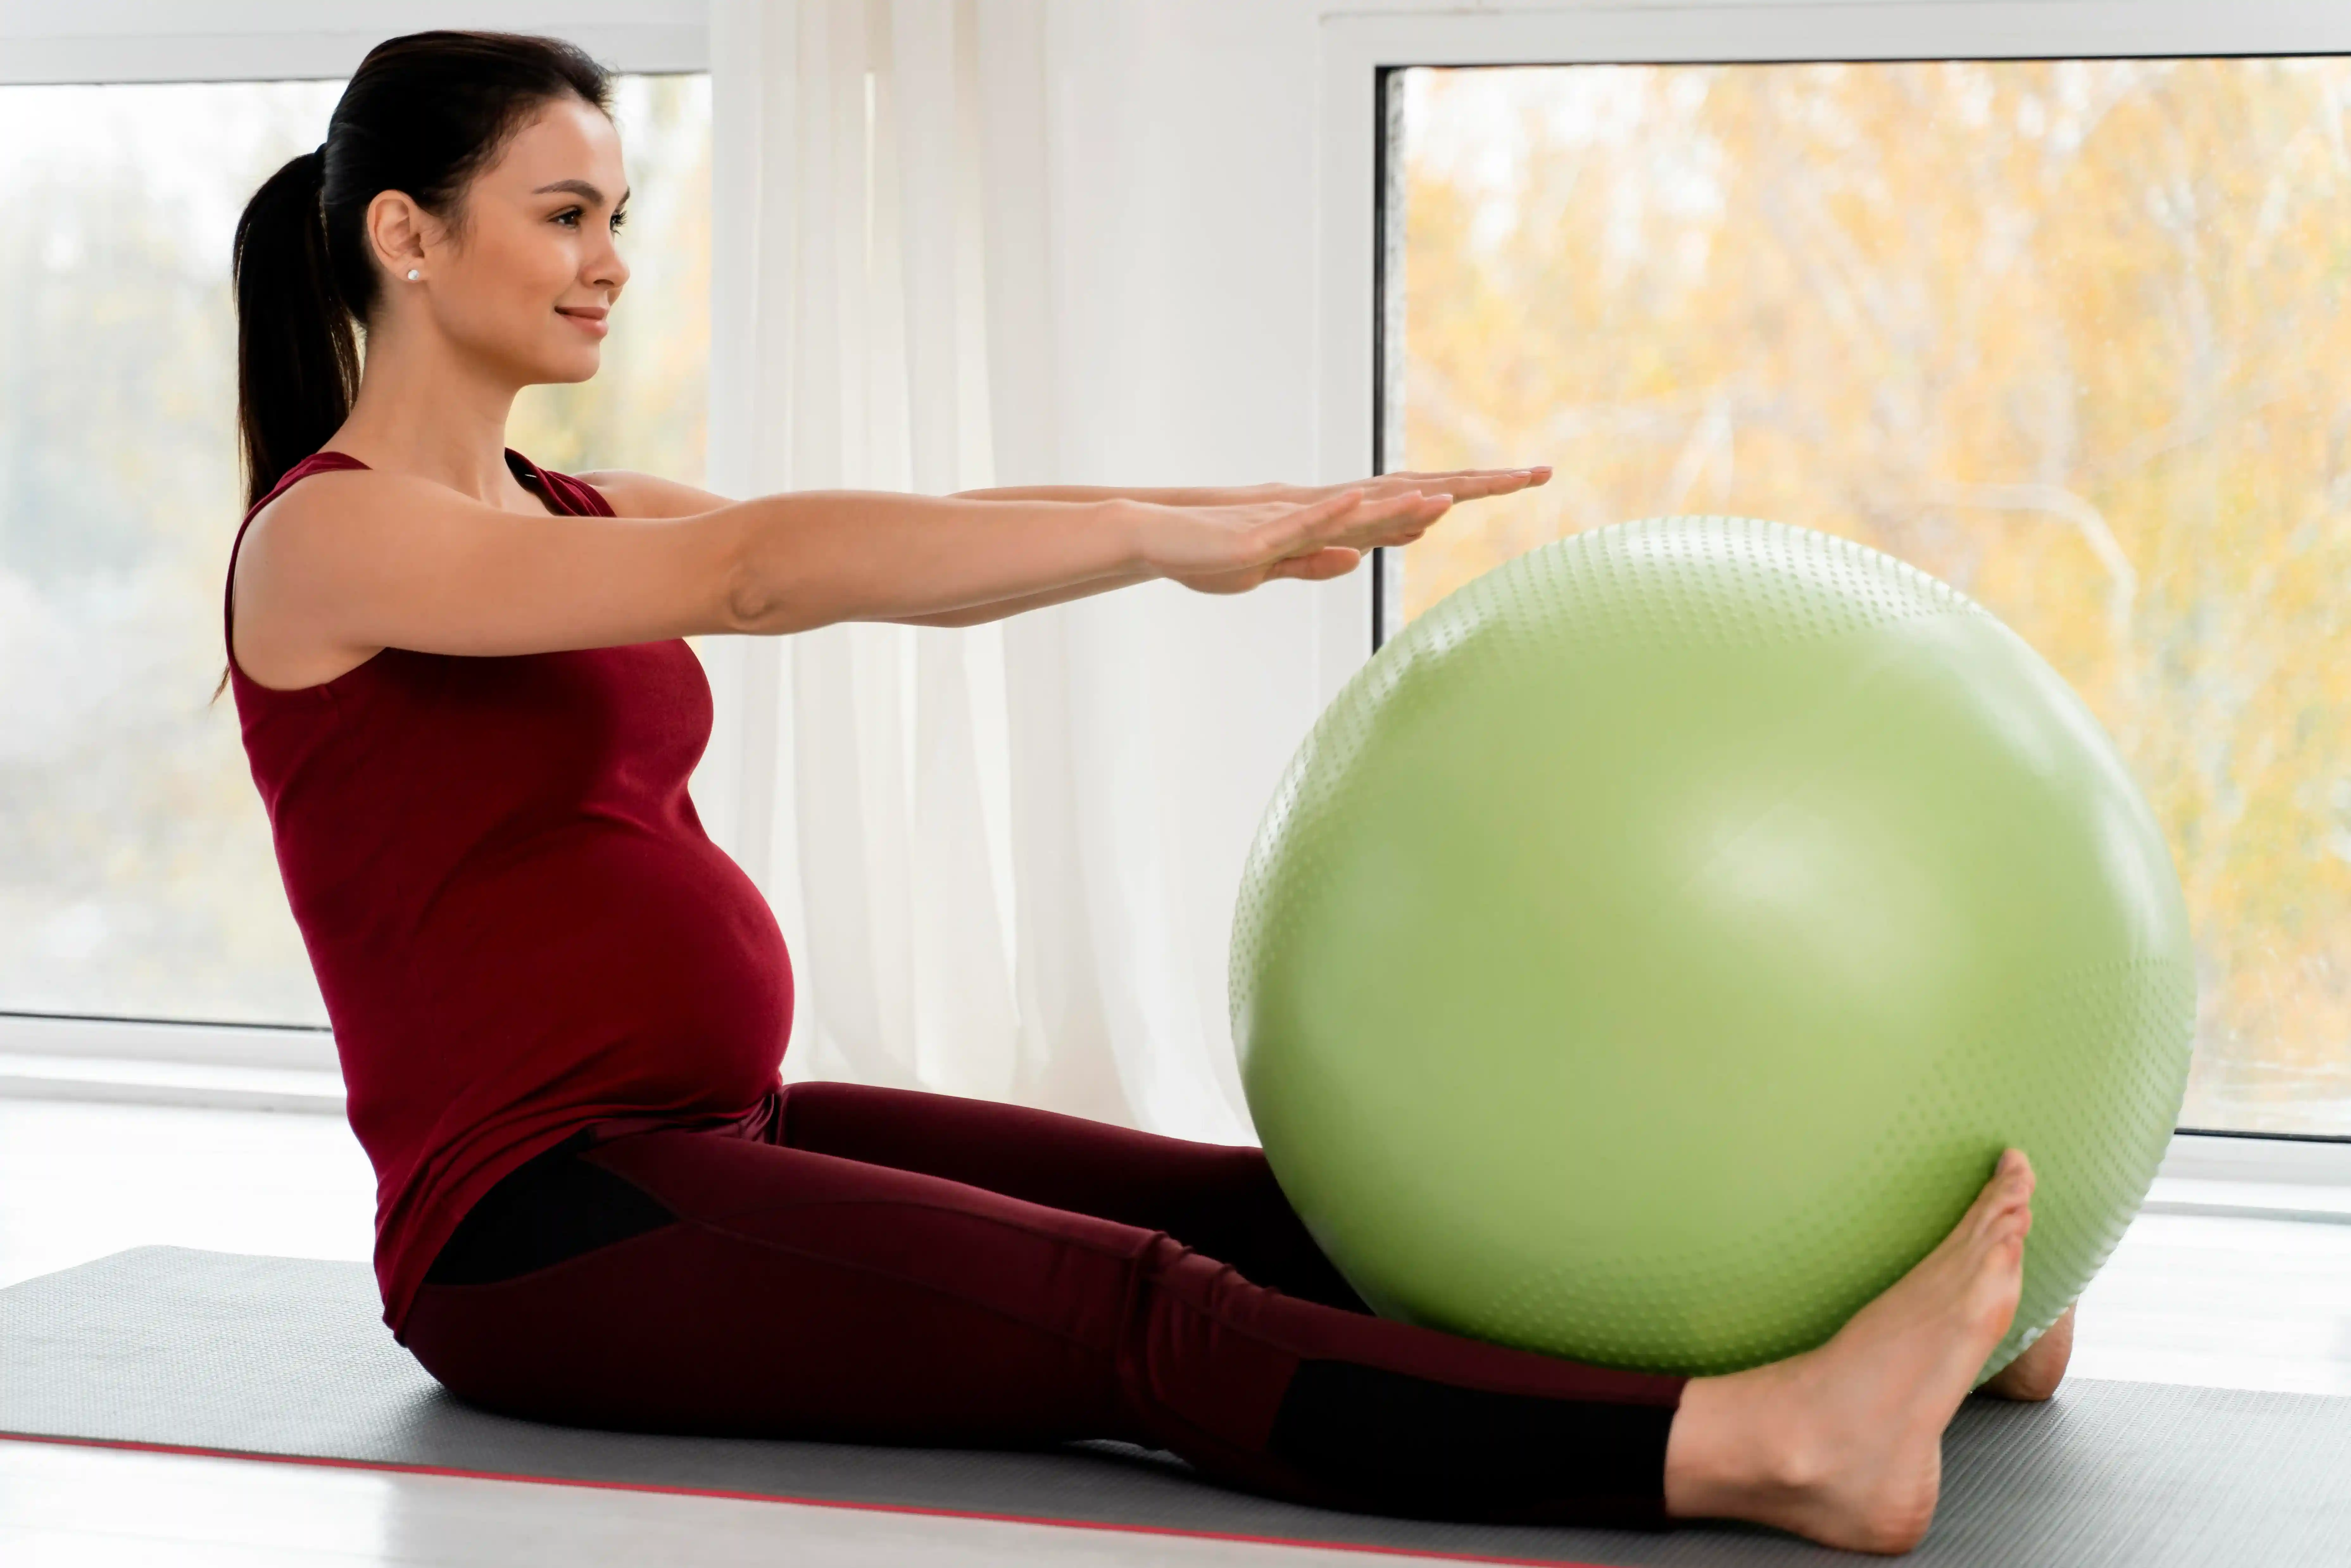 Physical Activity and Exercise During Pregnancy